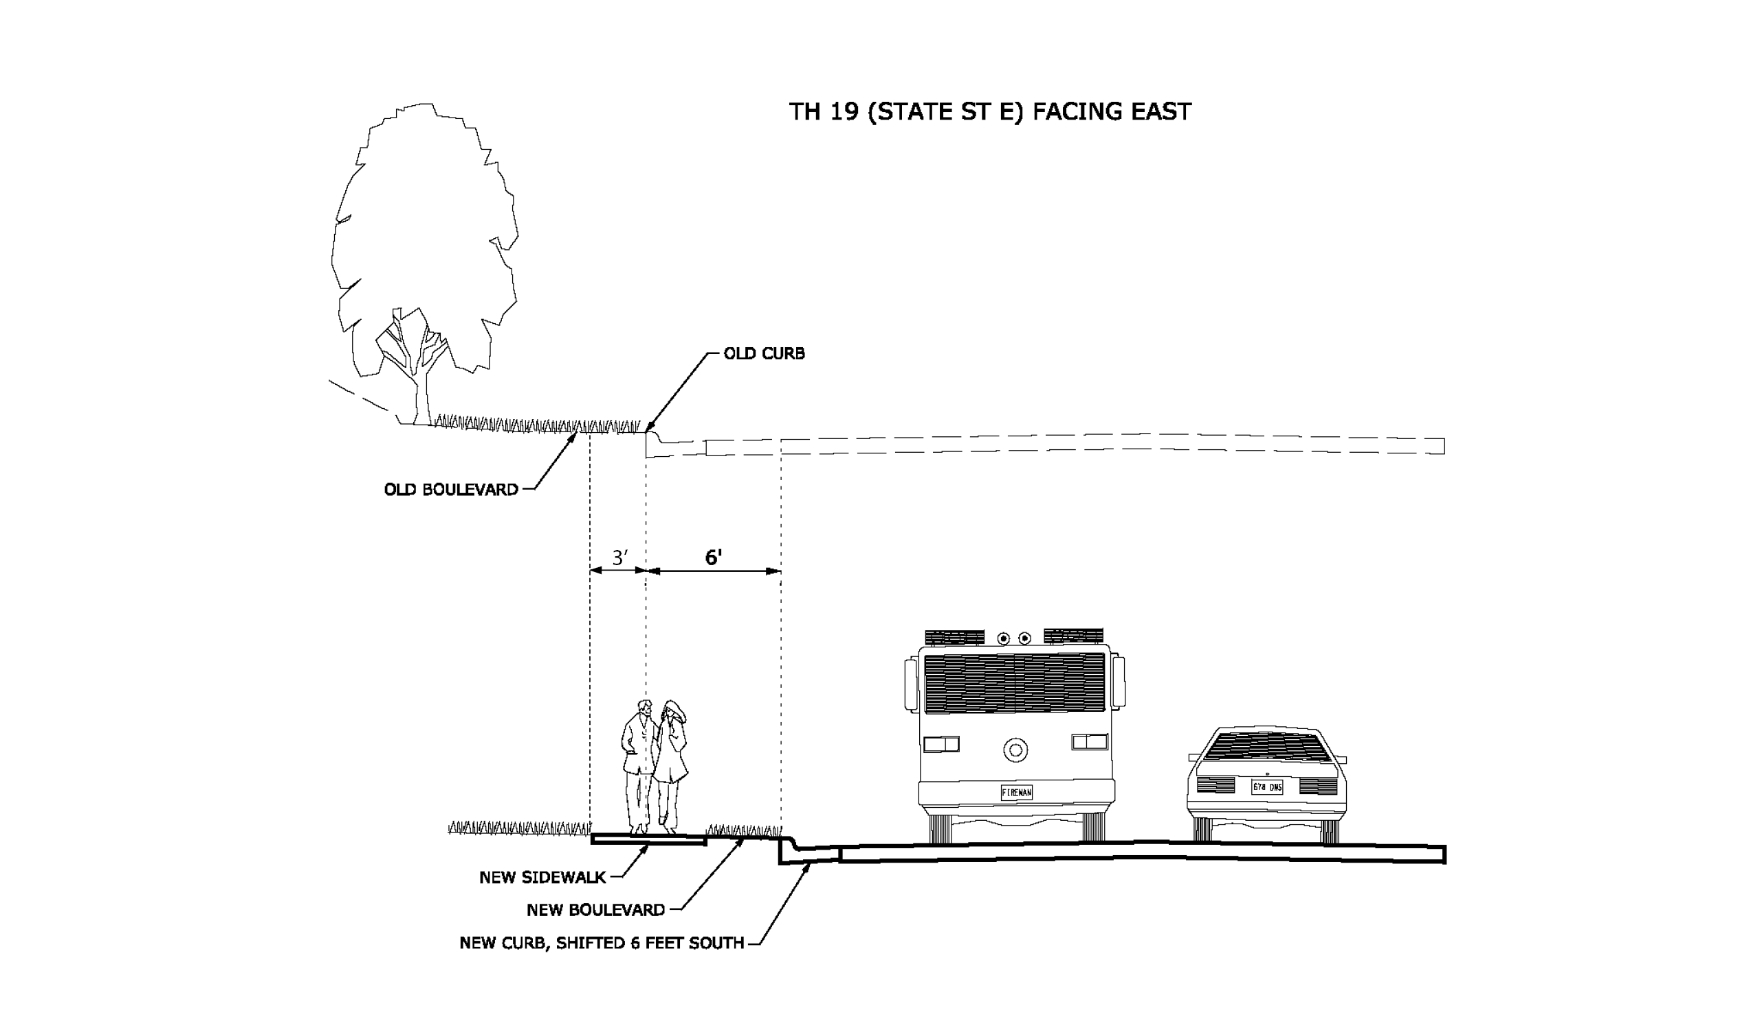 Cross section of proposed changes on Hwy 19 from 1st St. N to Almond St.